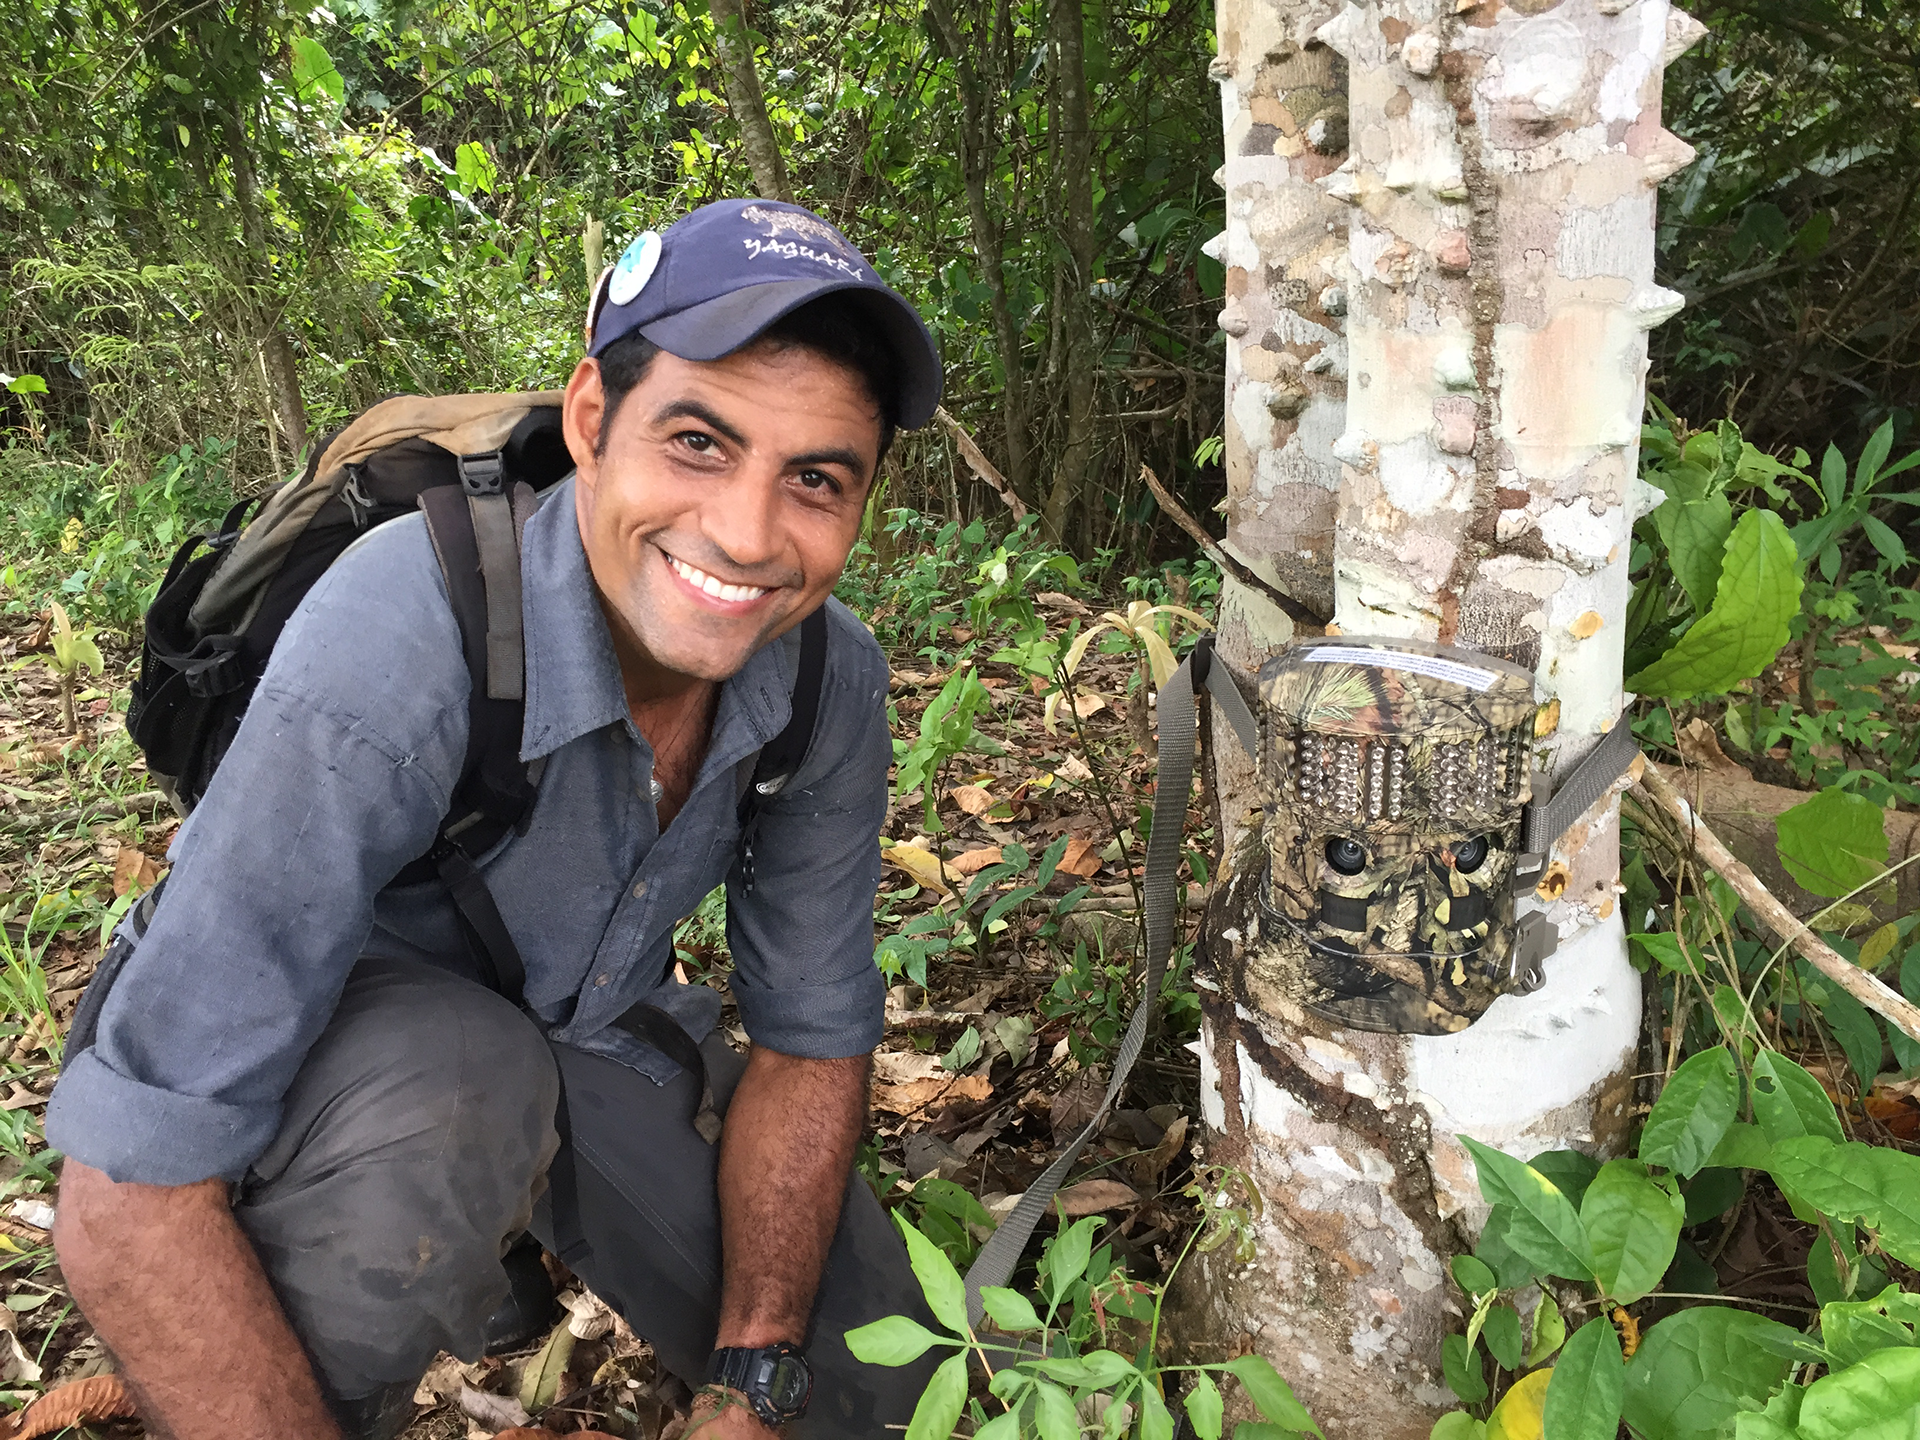 Ricardo Moreno with a camera trap used to catch pictures of wildlife, including shy predators like ocelots.